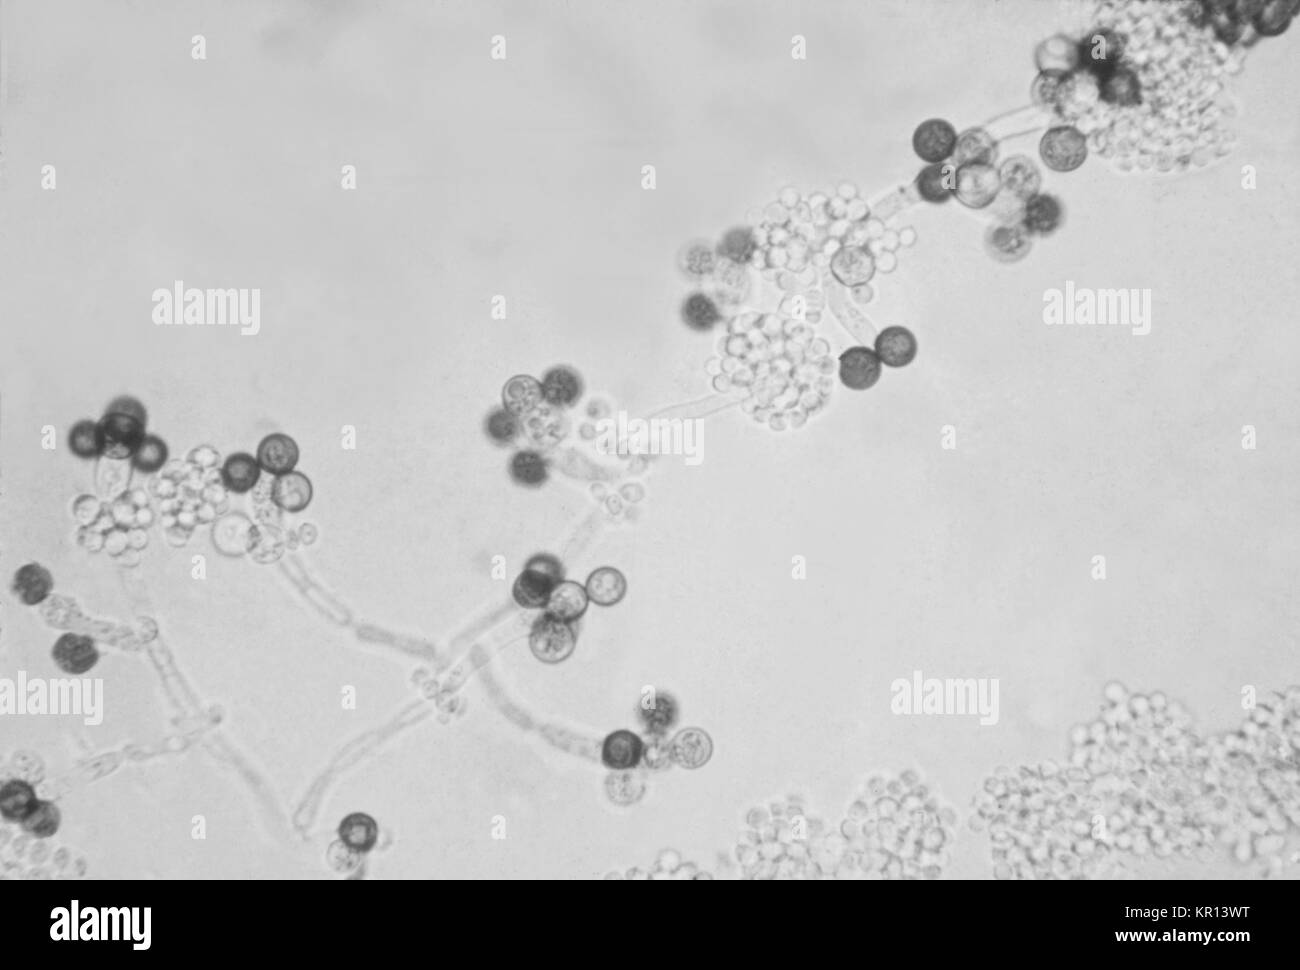 The candida albicans yeast Black and White Stock Photos & Images - Alamy